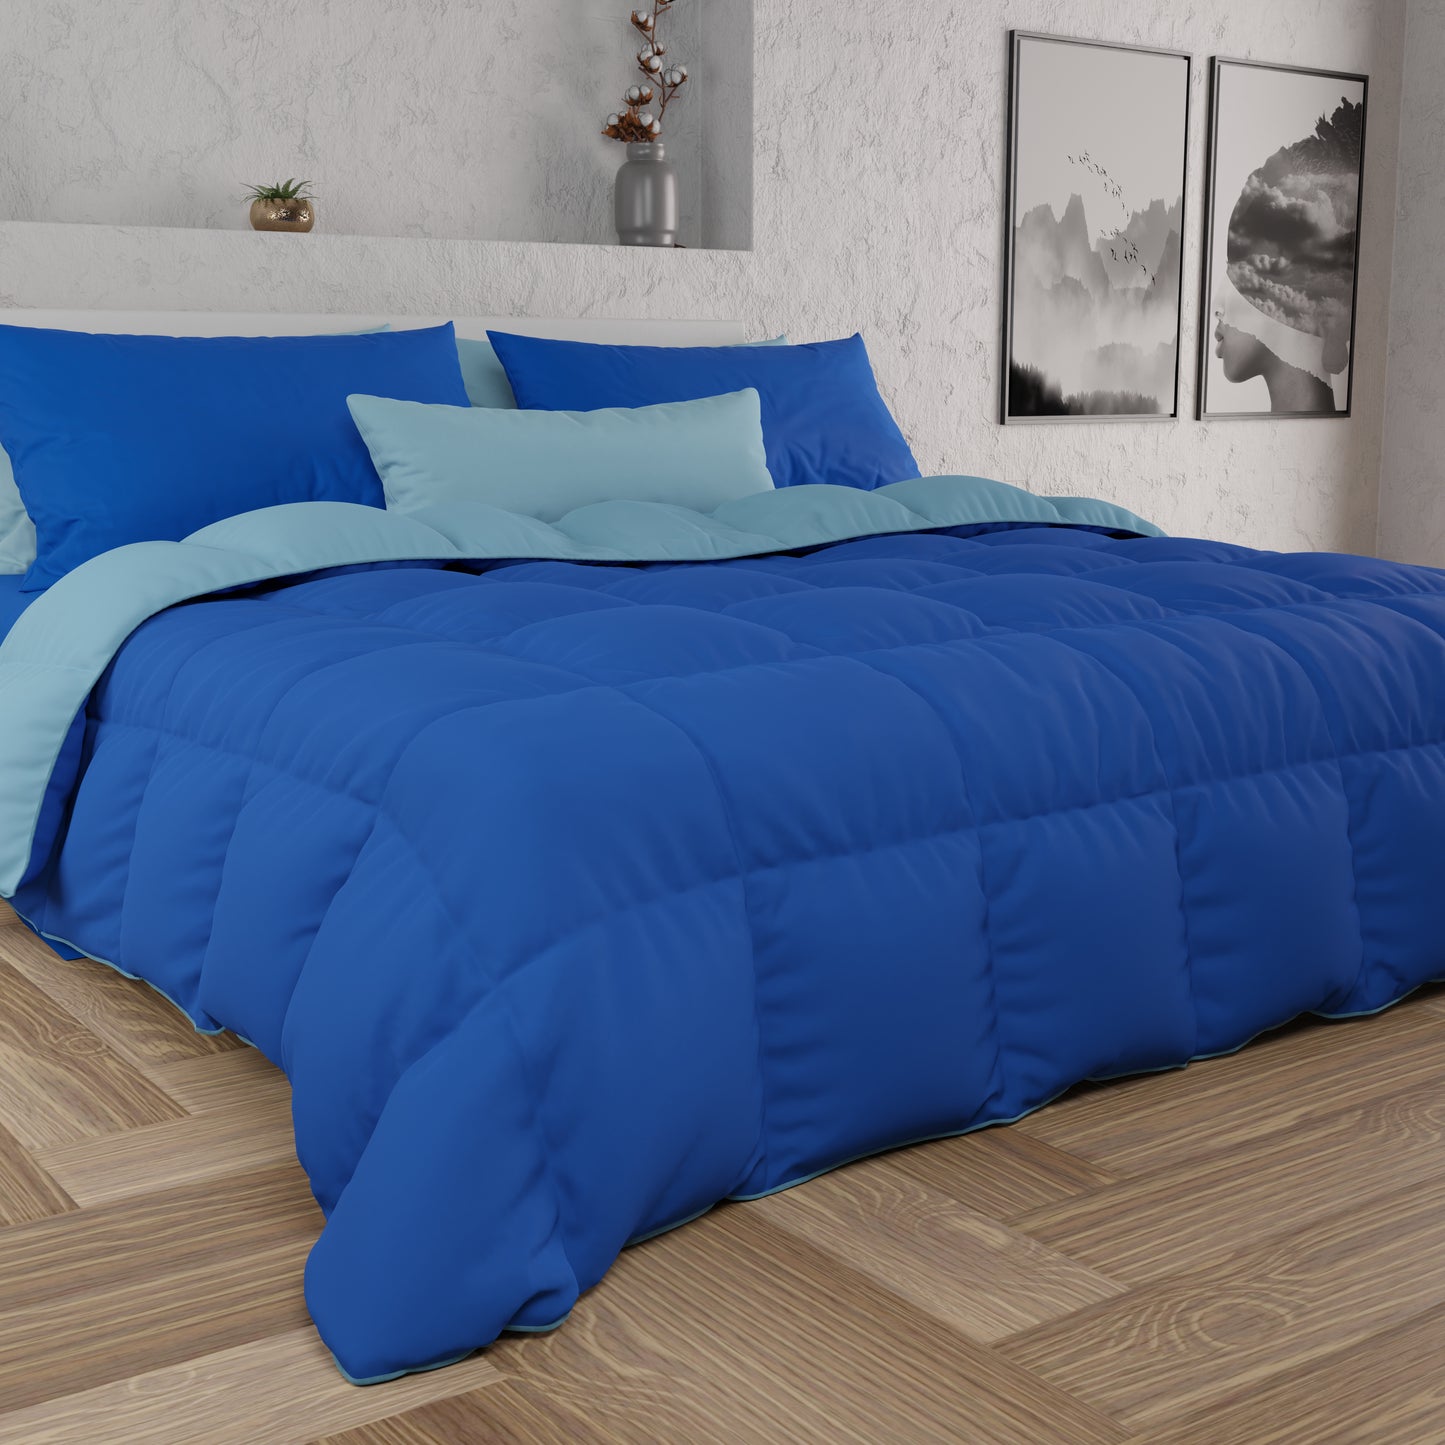 Duvet Quilt for Double, Single, Queen and a Half, Light Blue